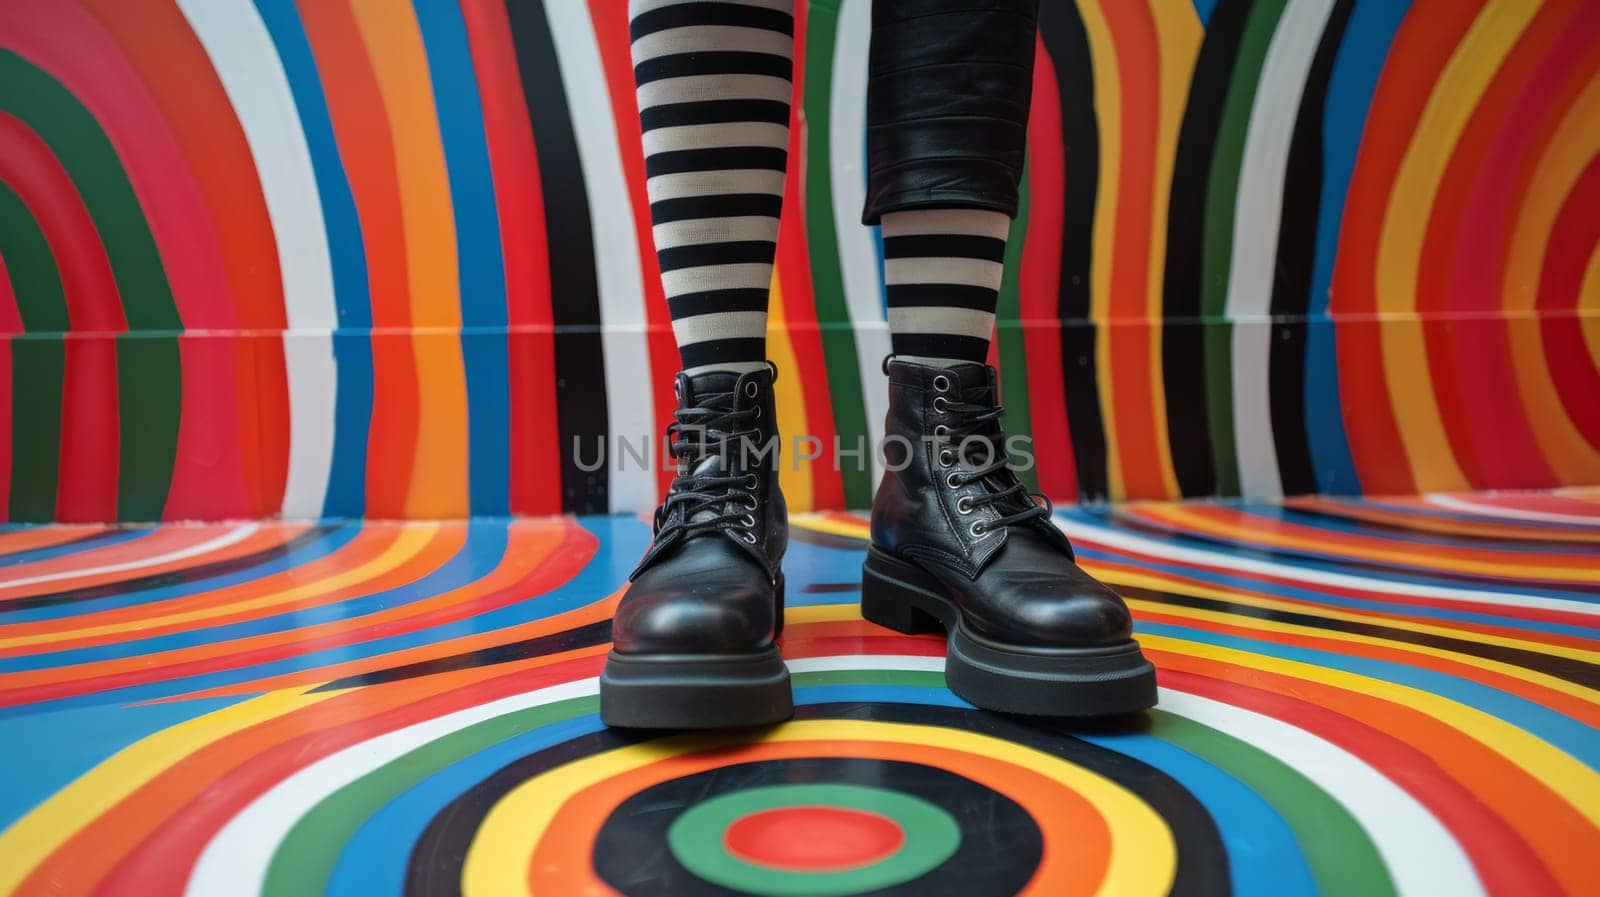 A person wearing black boots and striped socks standing on a colorful floor, AI by starush